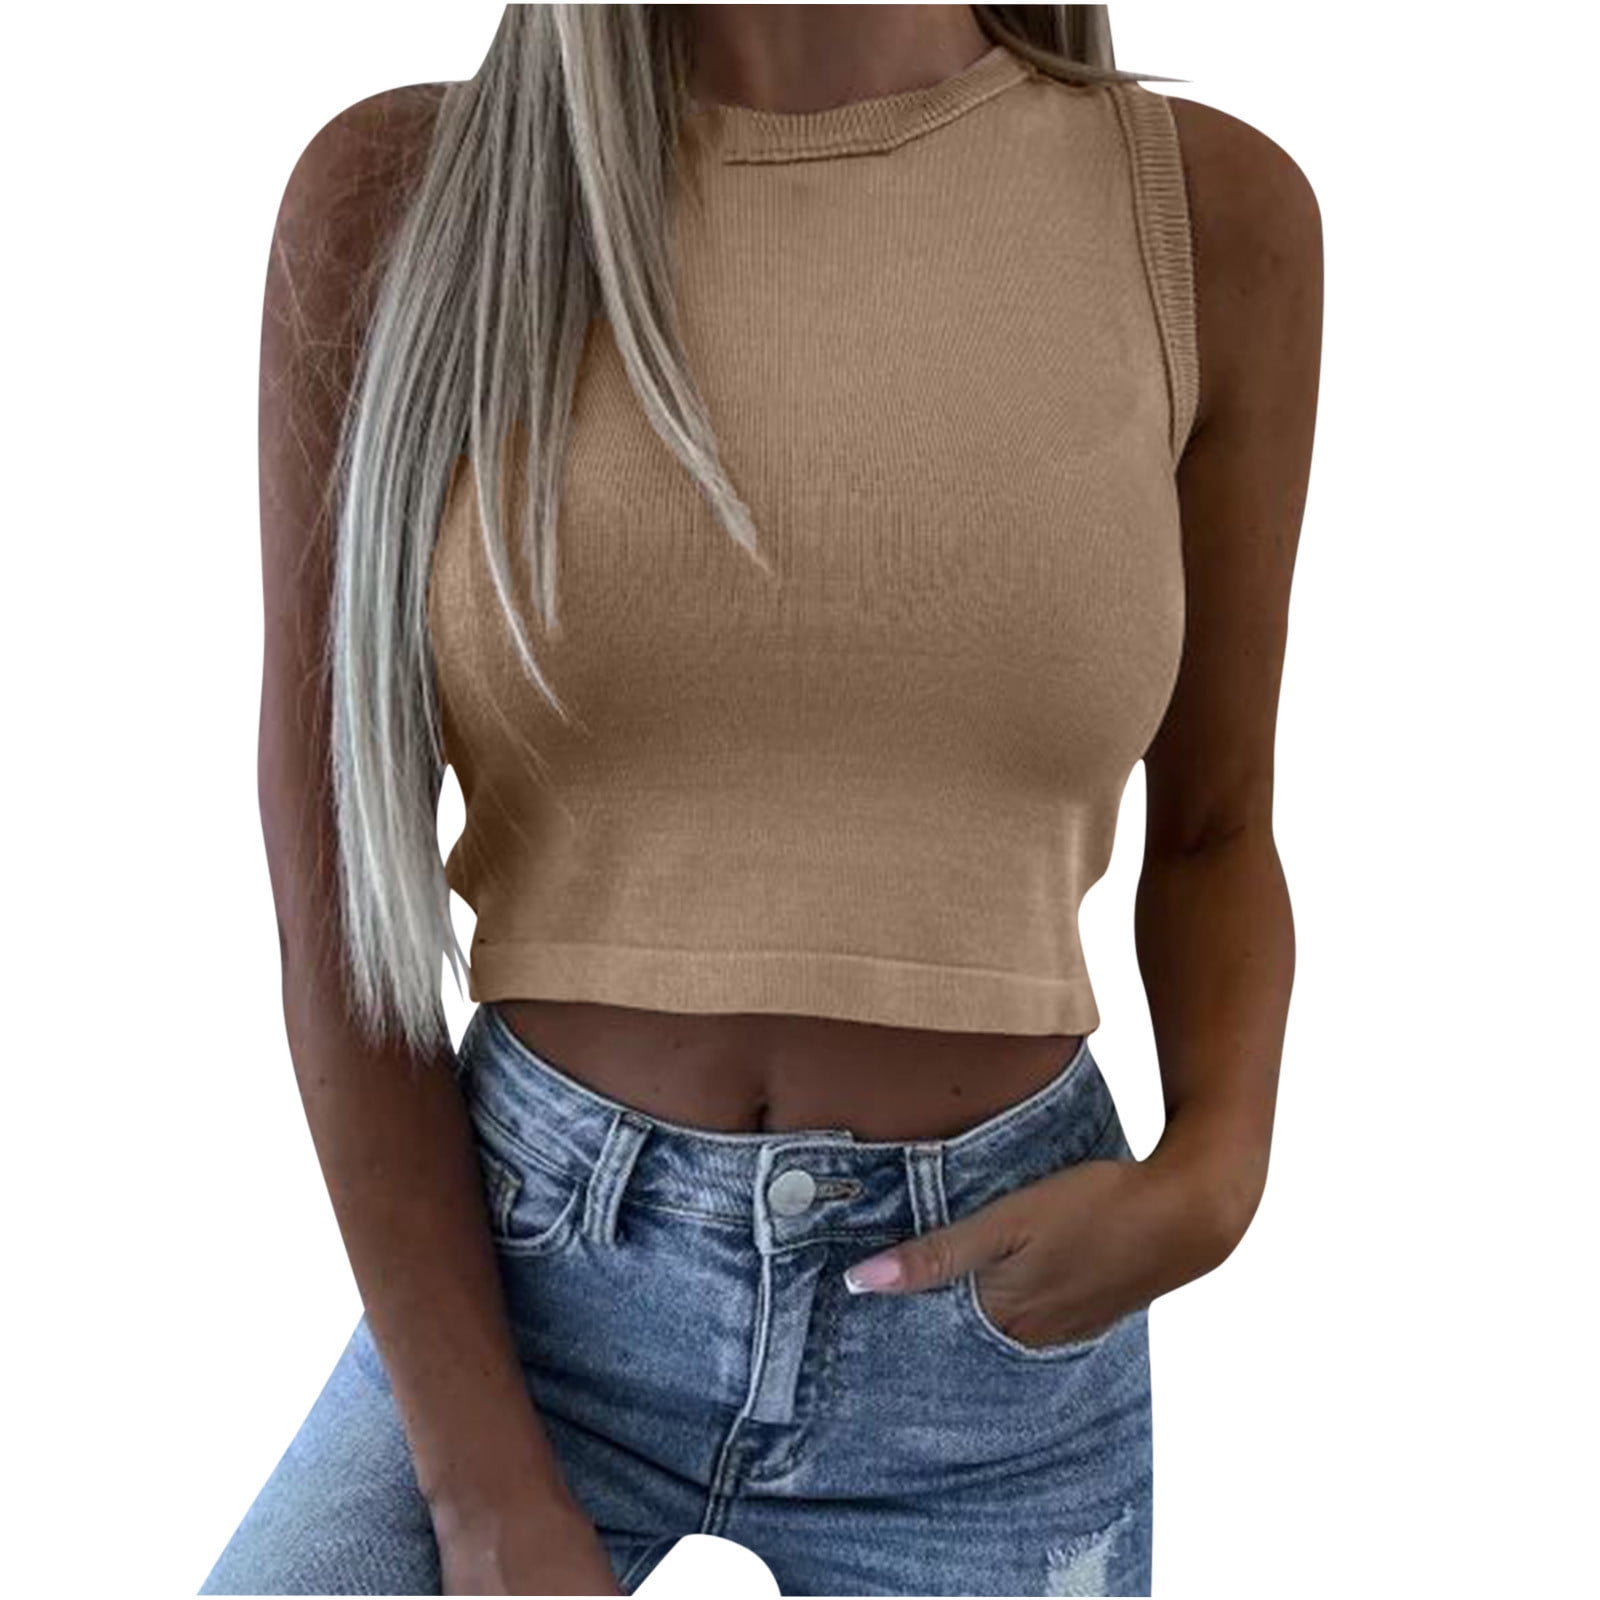 RYRJJ Crop Tops for Women Sleeveless Deep V Neck Workout Tops Plunging Ring  Cleavage Cropped Tank Top Y2k Fashion Streetwear(White,M)